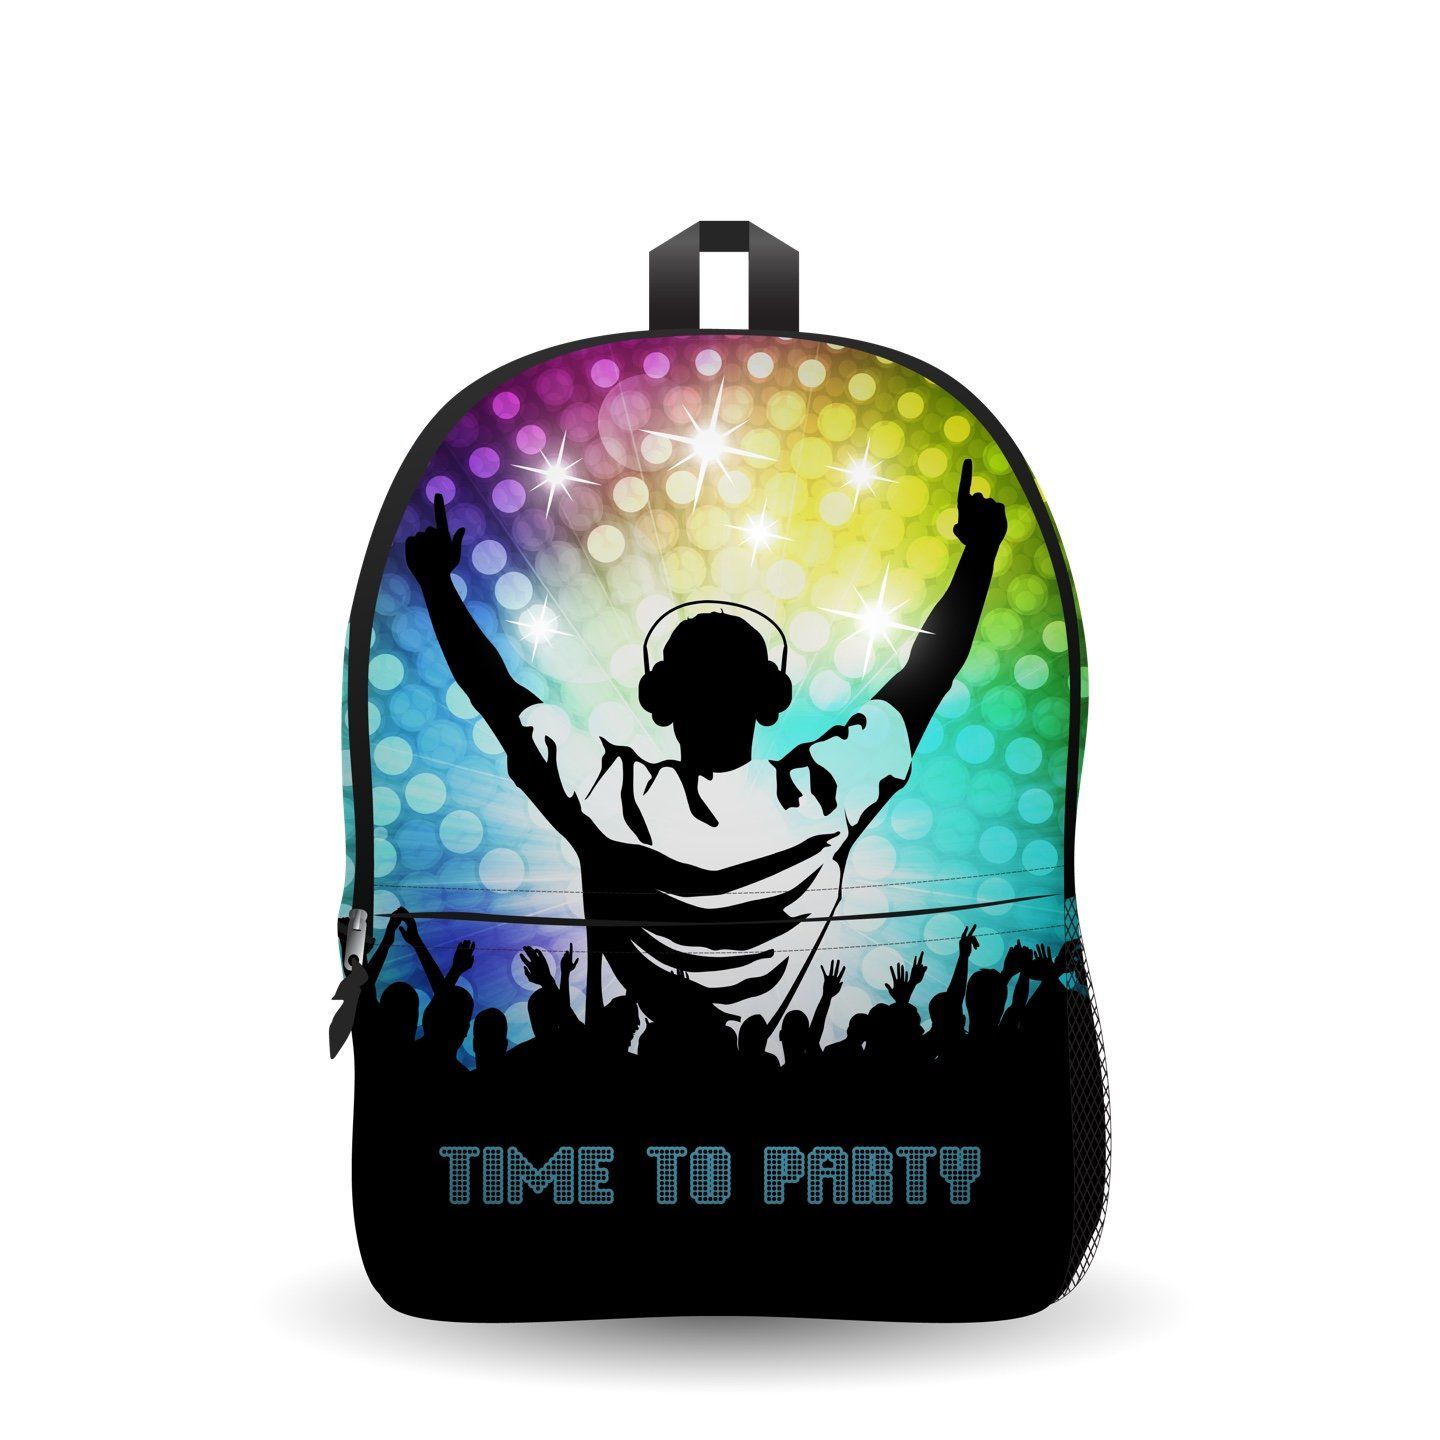 Disco BackPack - Small